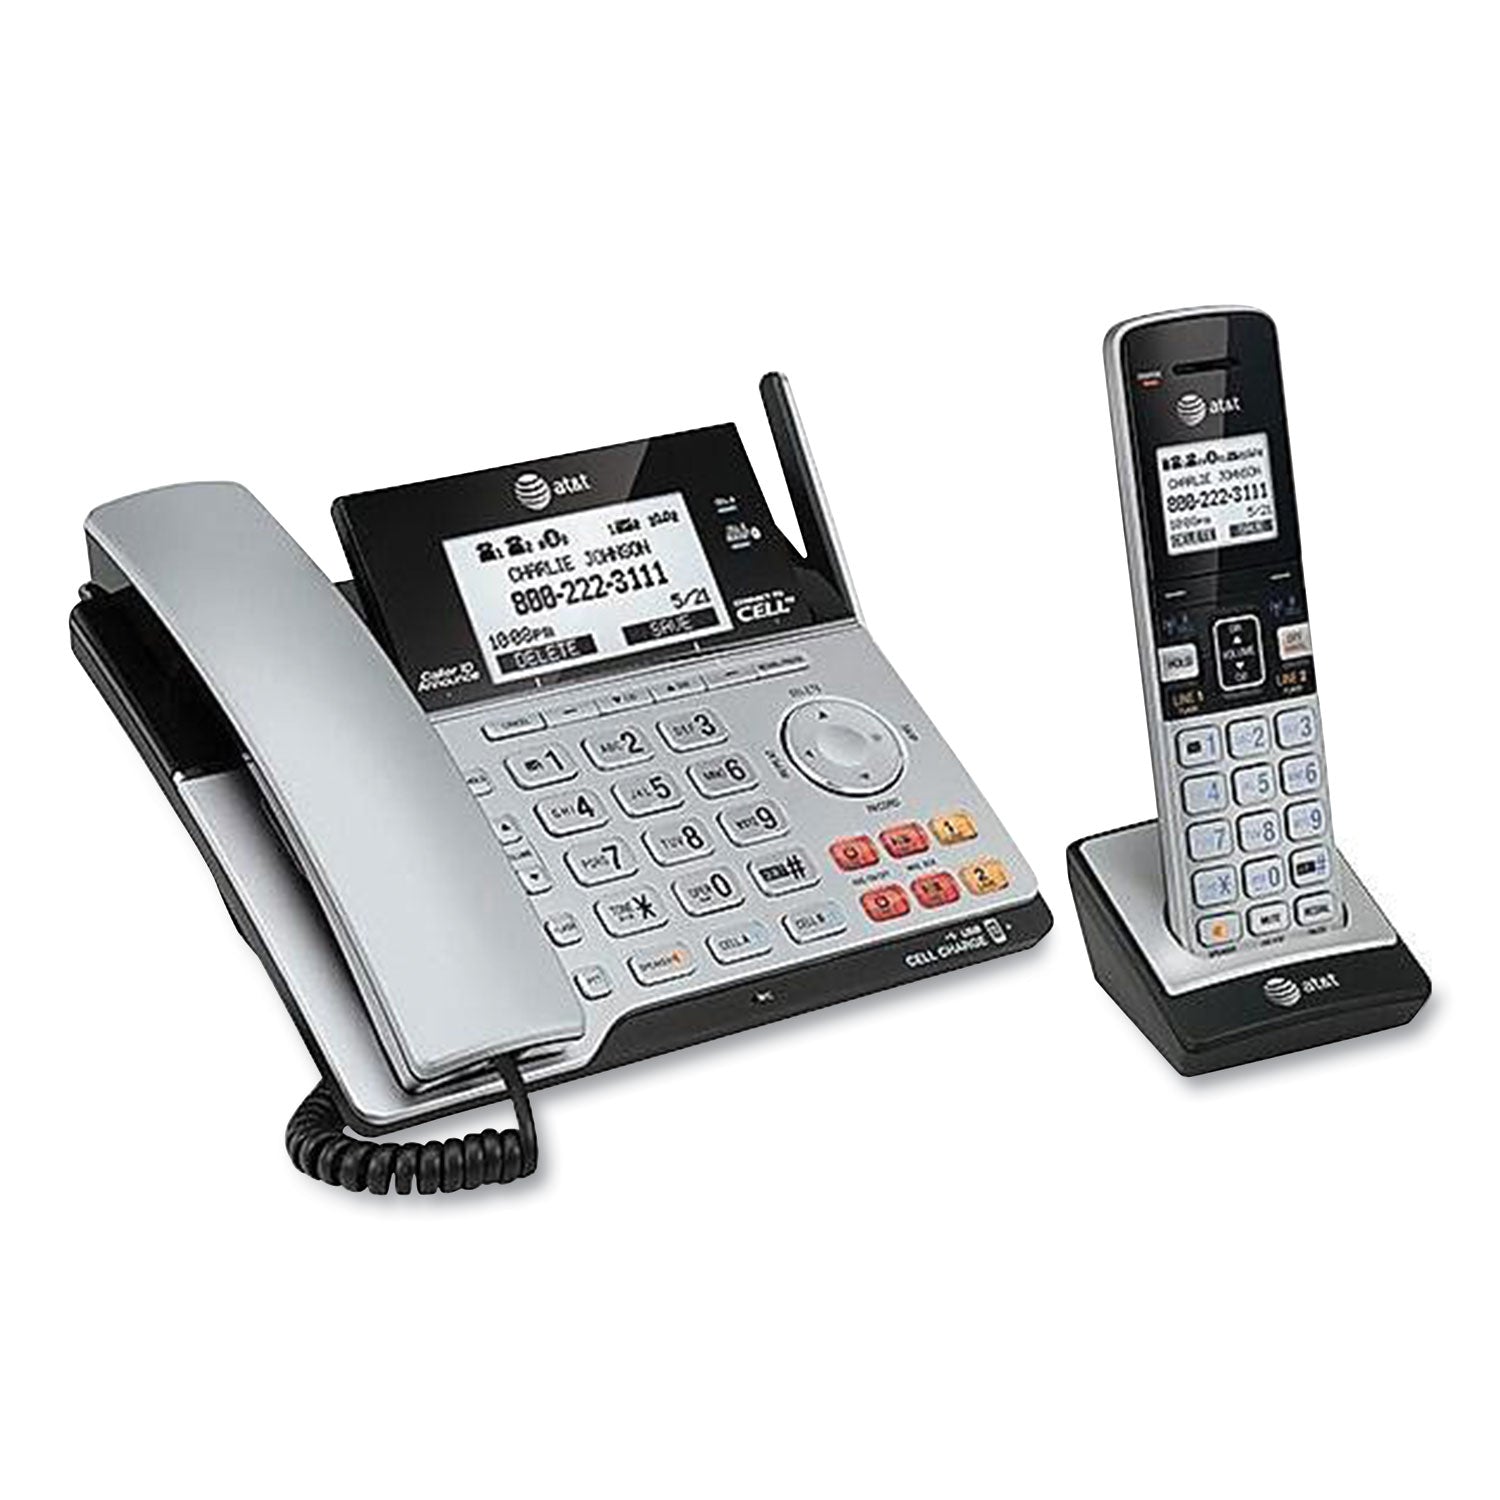 connect-to-cell-tl86103-two-line-corded-cordless-phone-corded-base-station-and-1-additional-handset-black-silver_atttl86103 - 3